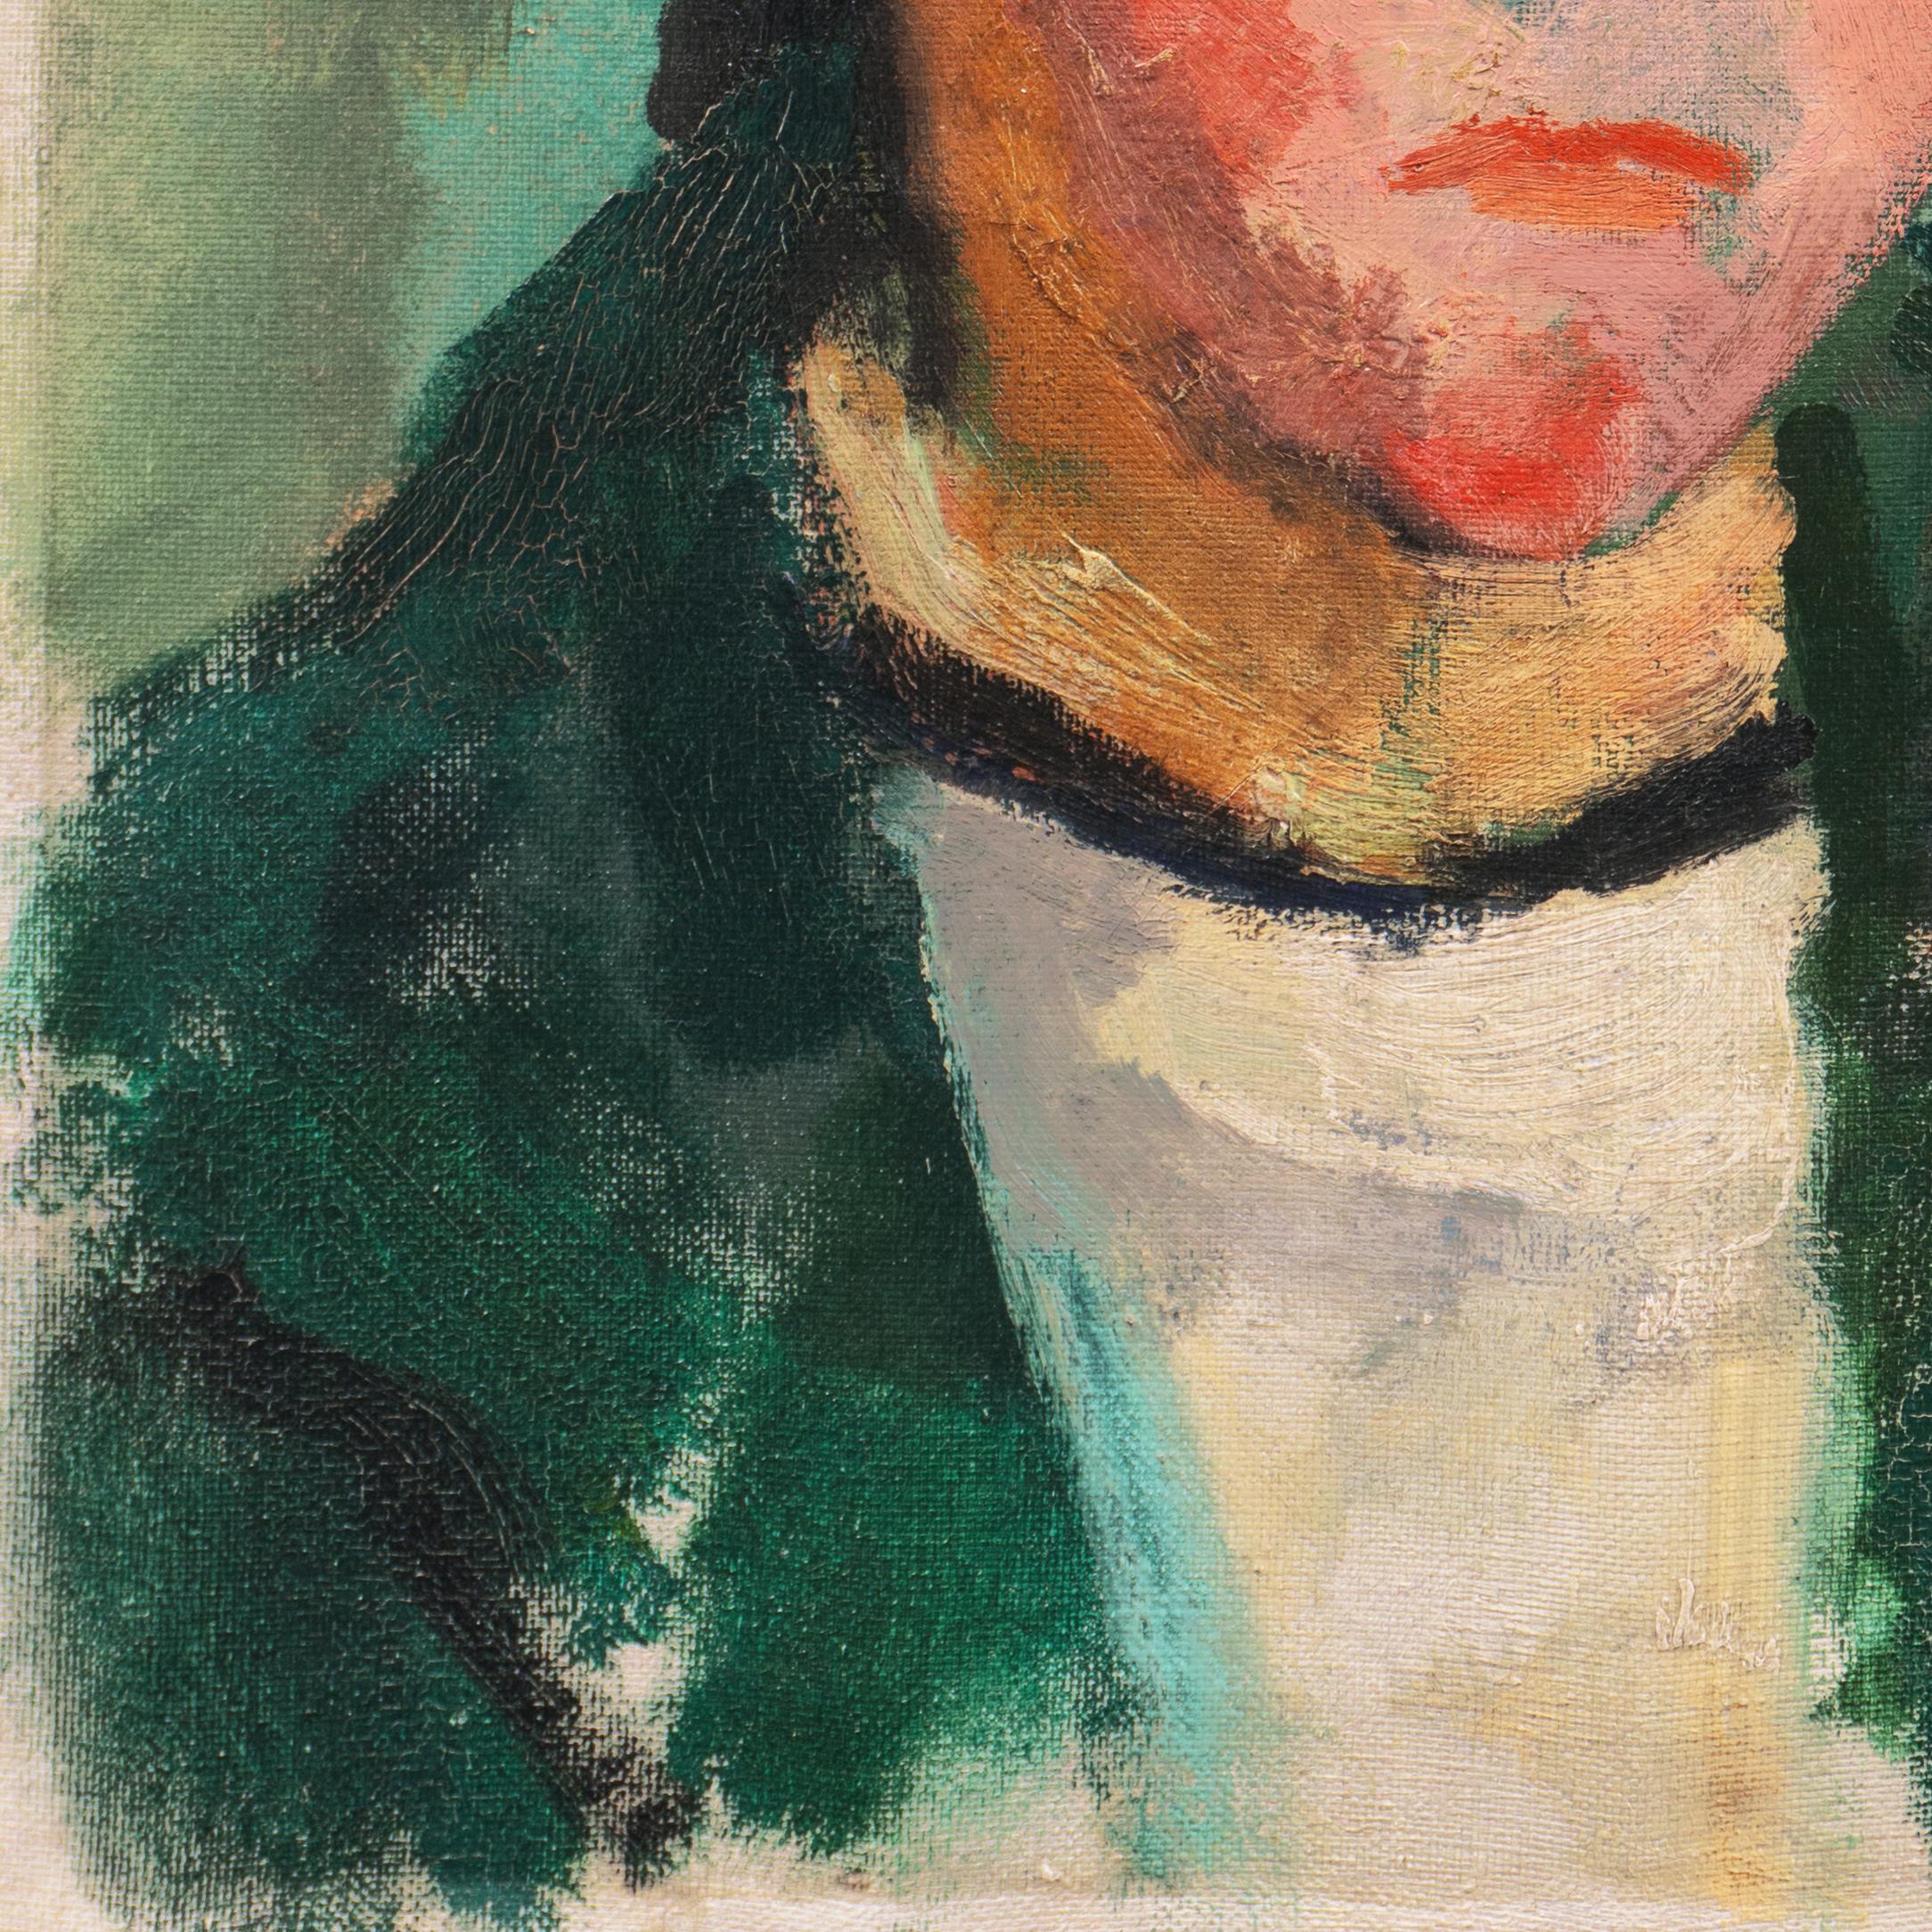 A vibrant, early 20th century oil study of a young Breton girl shown regarding the viewer with a stern and penetrating gaze.

Signed lower right 'Jais' for Jais Nielsen (Danish, 1885-1961), dated 1911 and titled 'Bretagne' (Brittany). Additionally